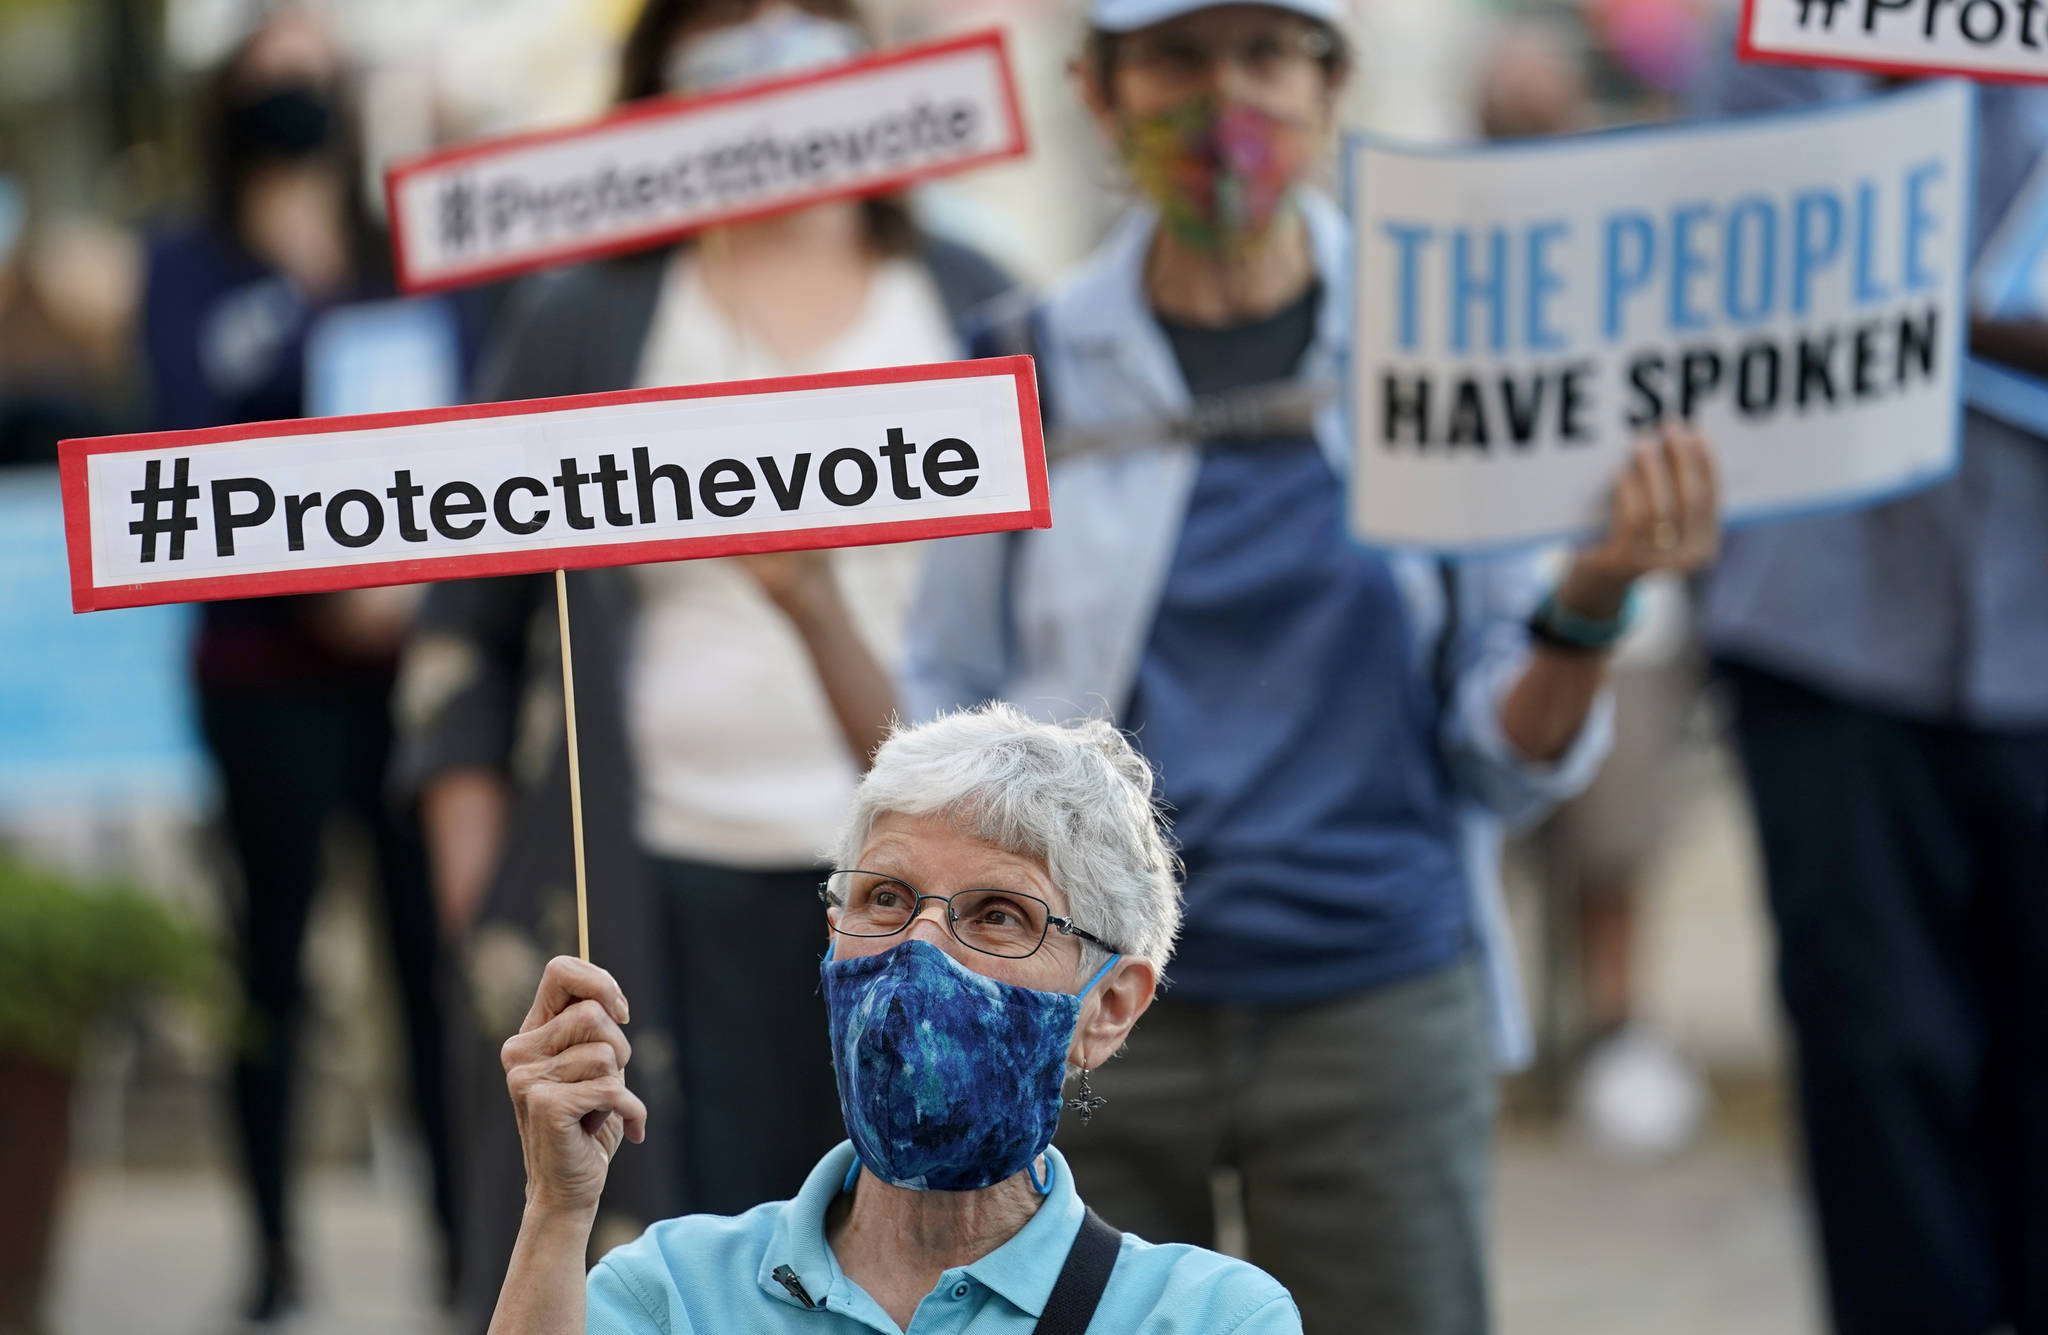 Protesters gather at a protect the vote rally in downtown San Antonio, Wednesday, Nov. 4, 2020. (AP Photo / Eric Gay)